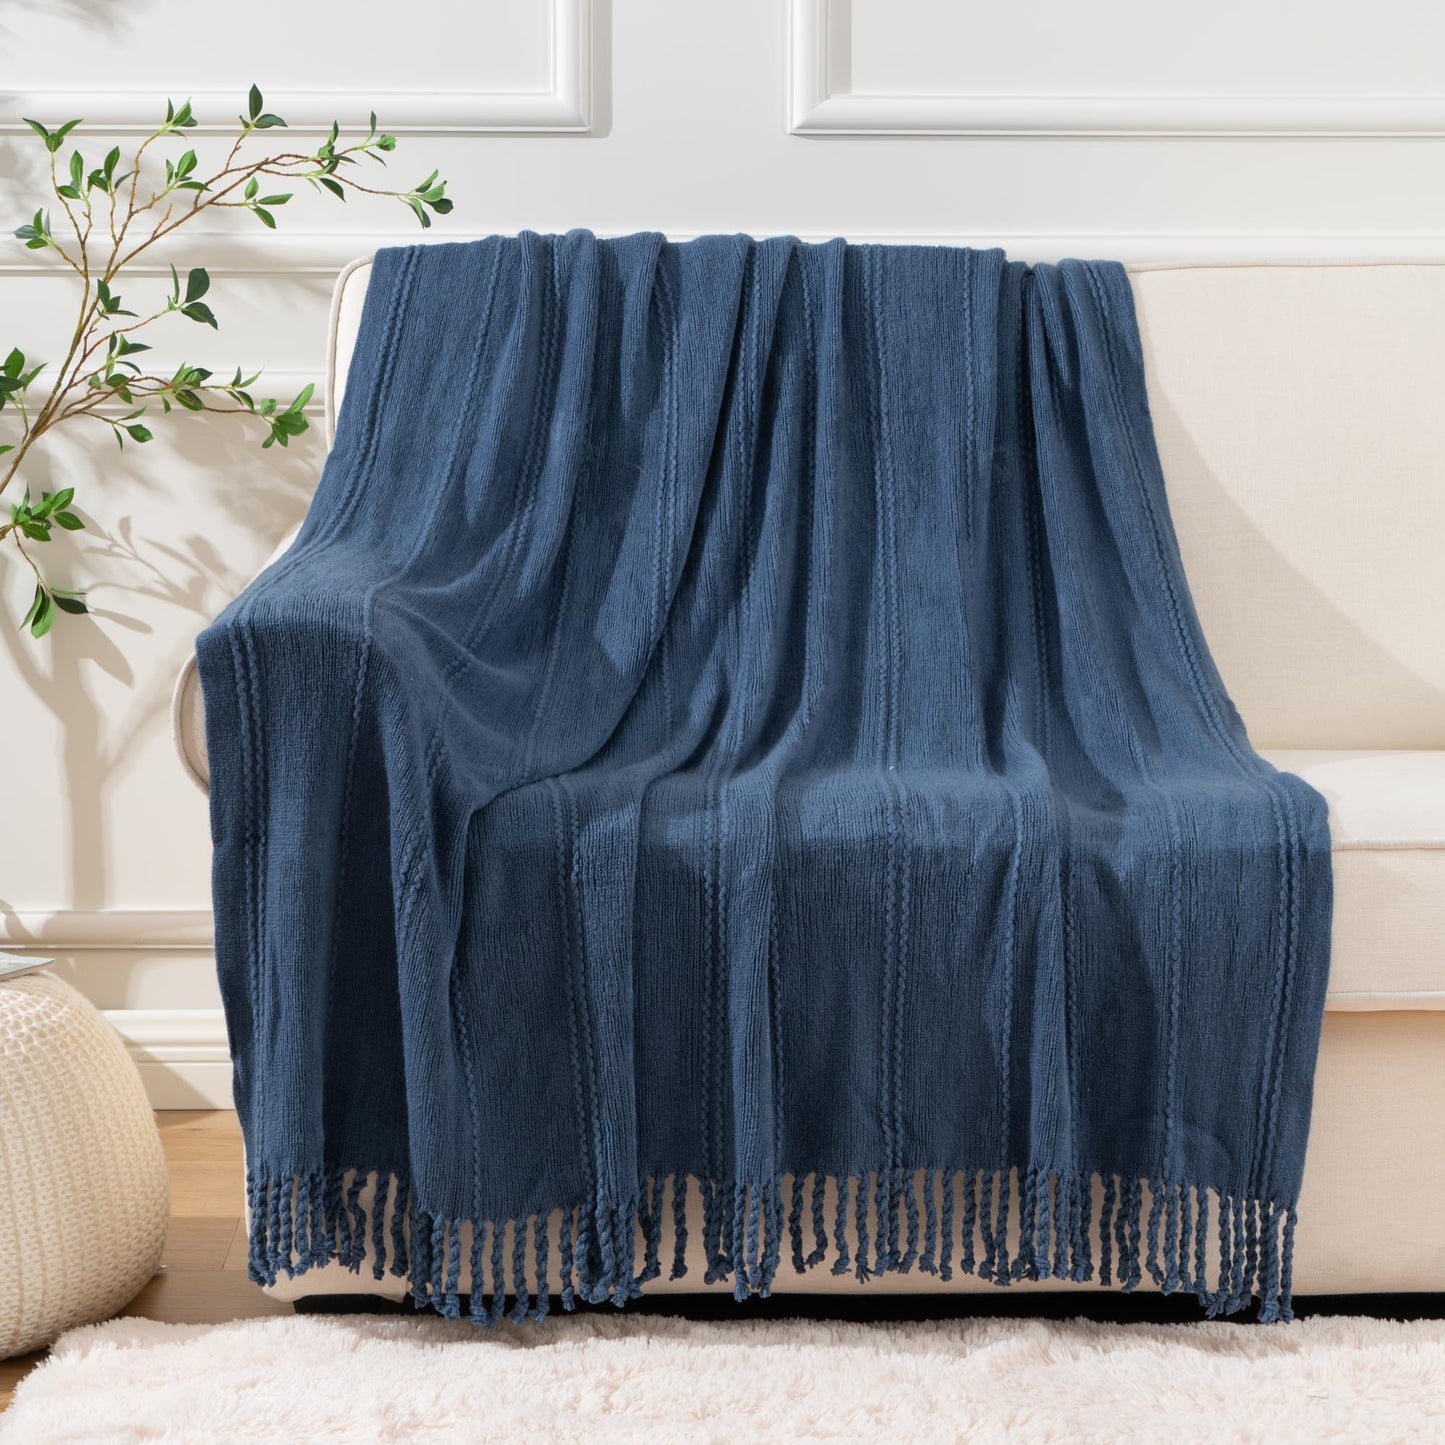 Cable Knit Woven Luxury Throw Blanket with Tassel Ends 50"x 60" (Green) BTL15019 green/blue